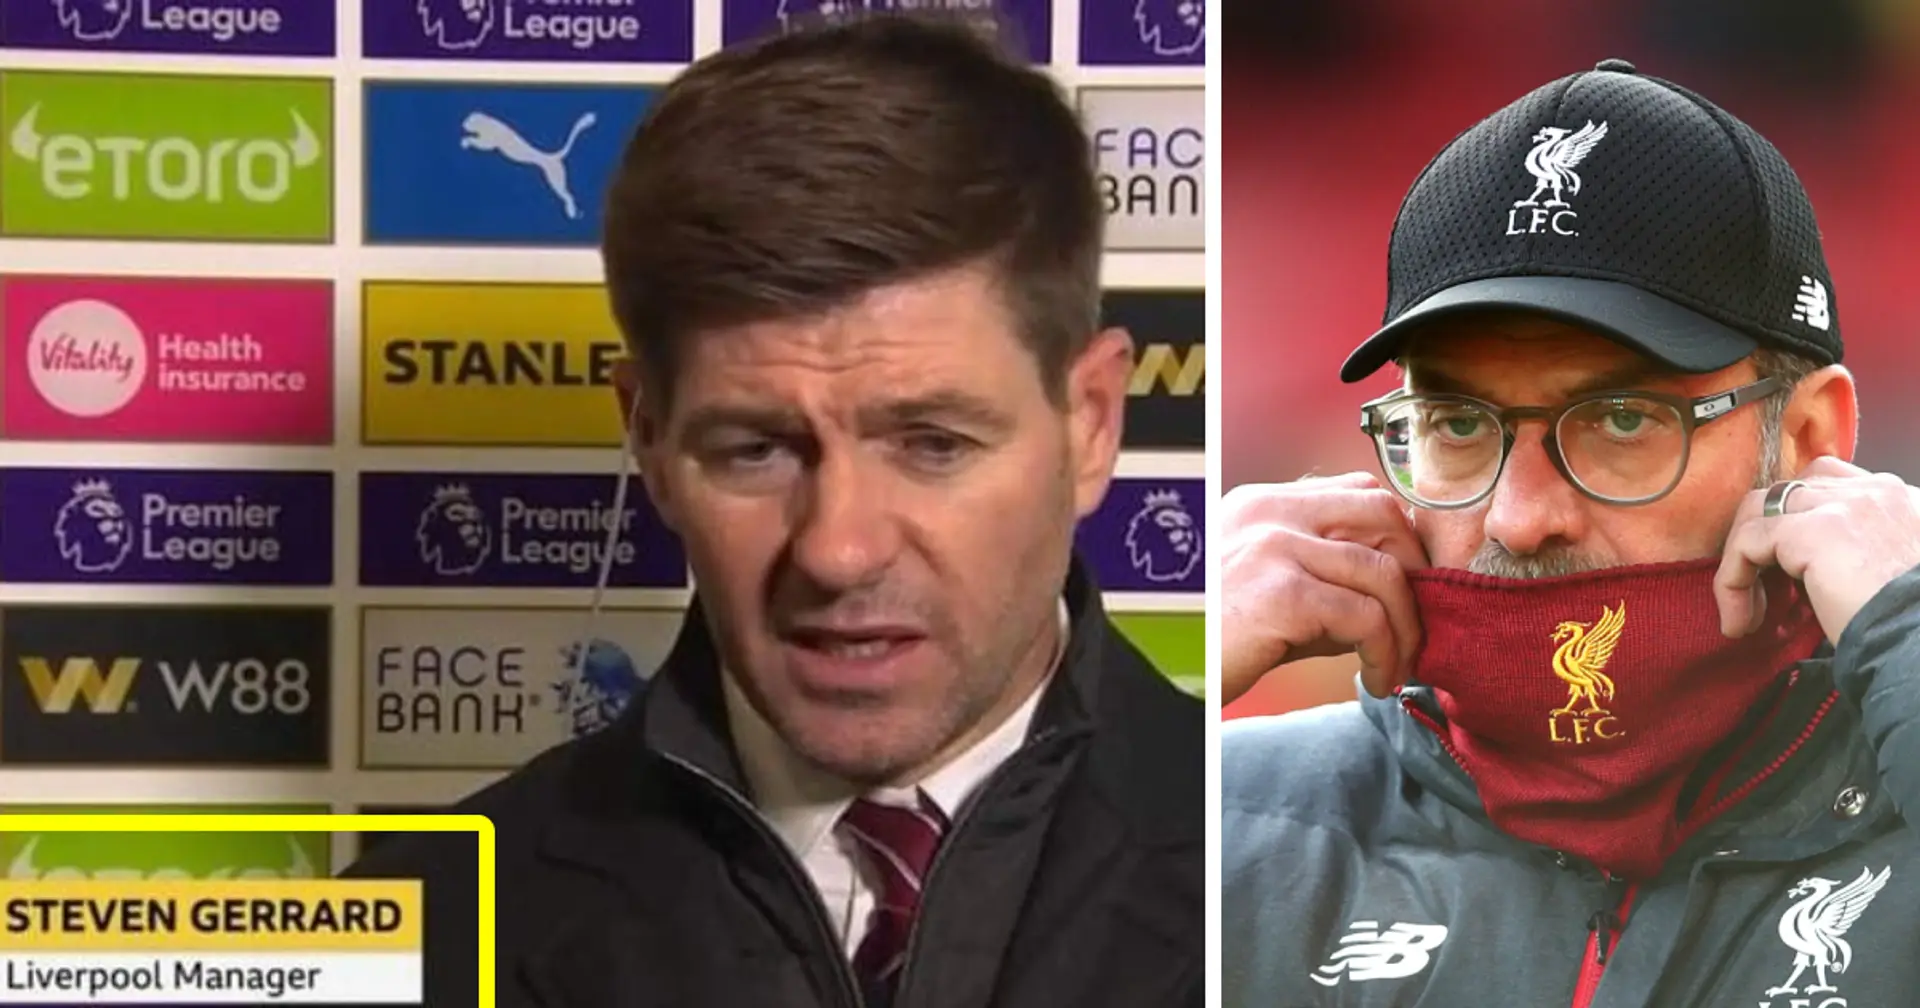 BBC label Gerrard 'Liverpool manager' during live coverage of Aston Villa game